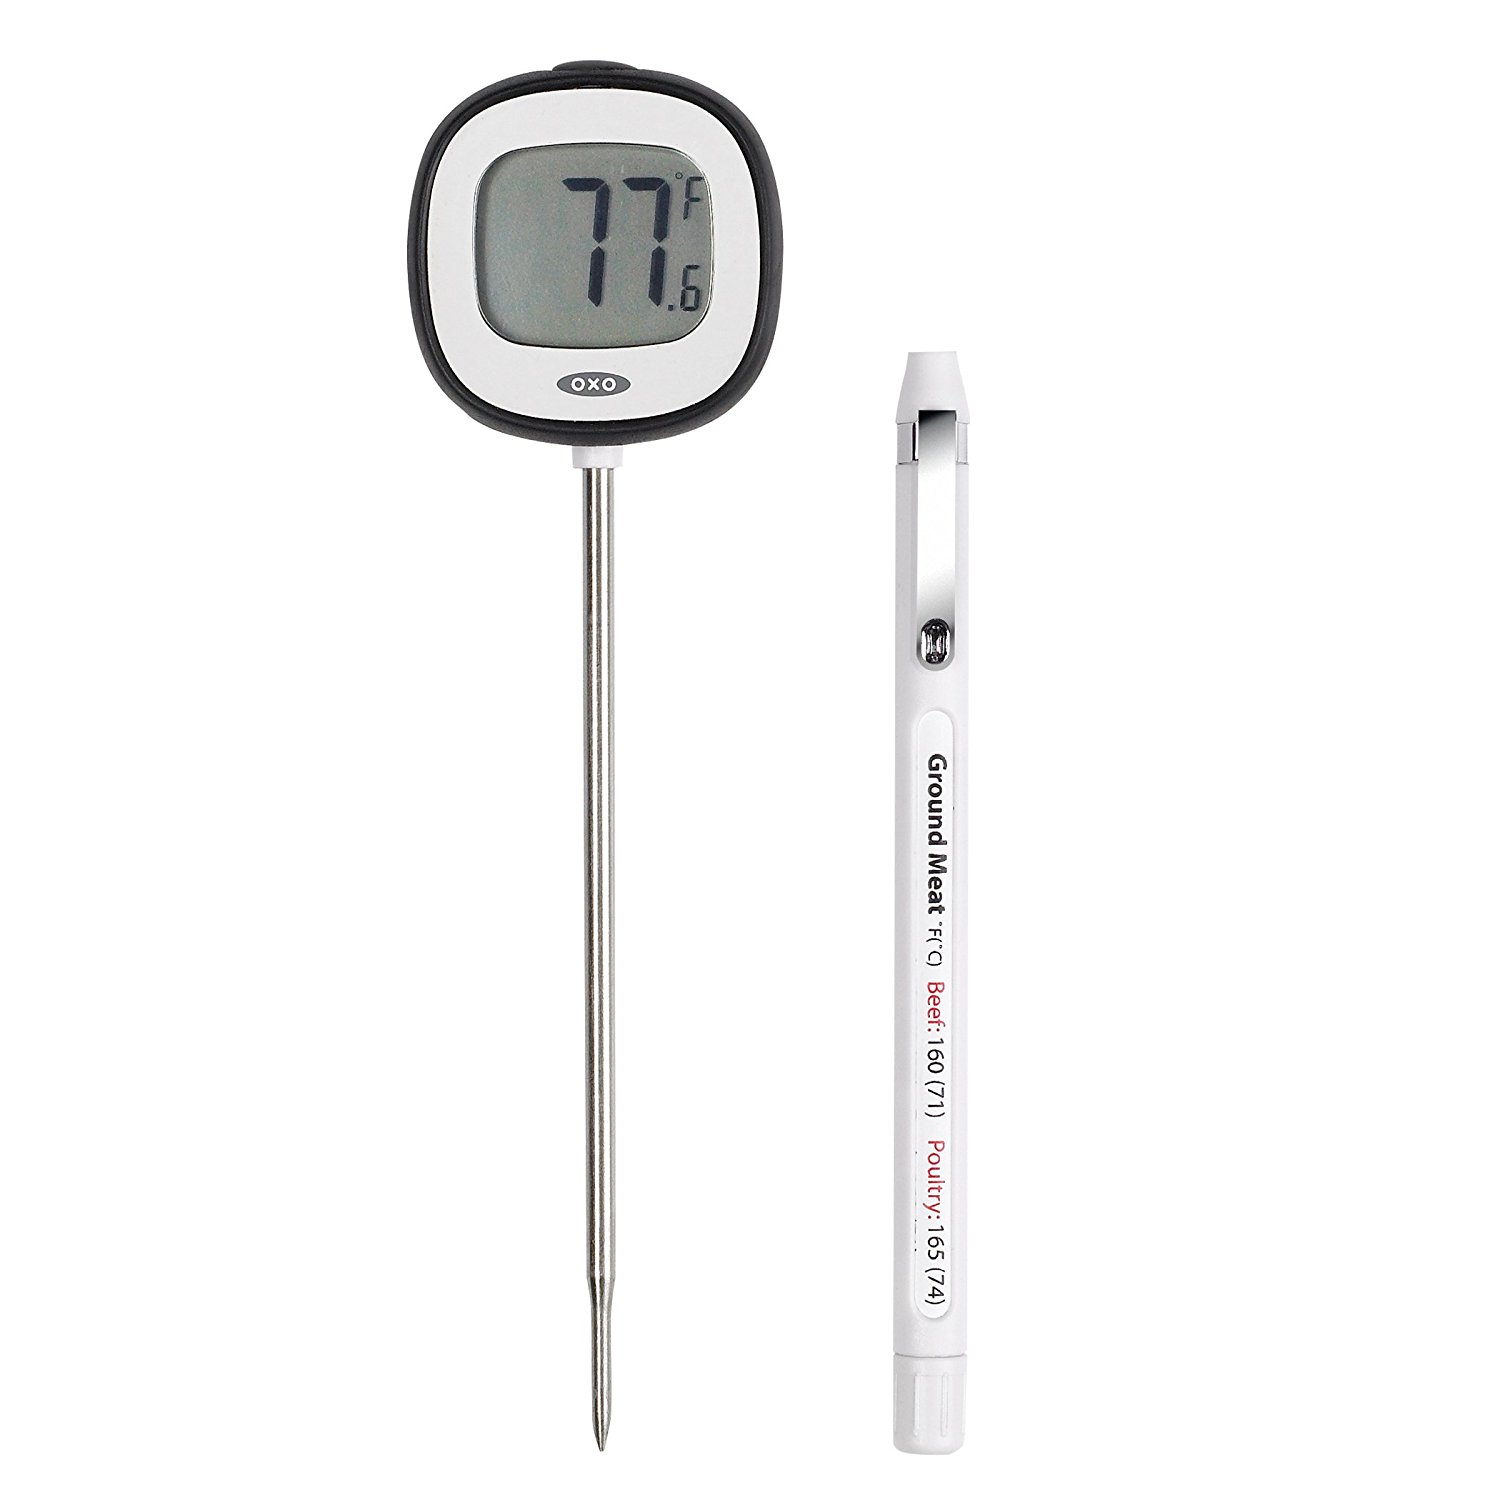 Amazon.com: OXO Good Grips Digital Instant Read Thermometer: Oxo ...